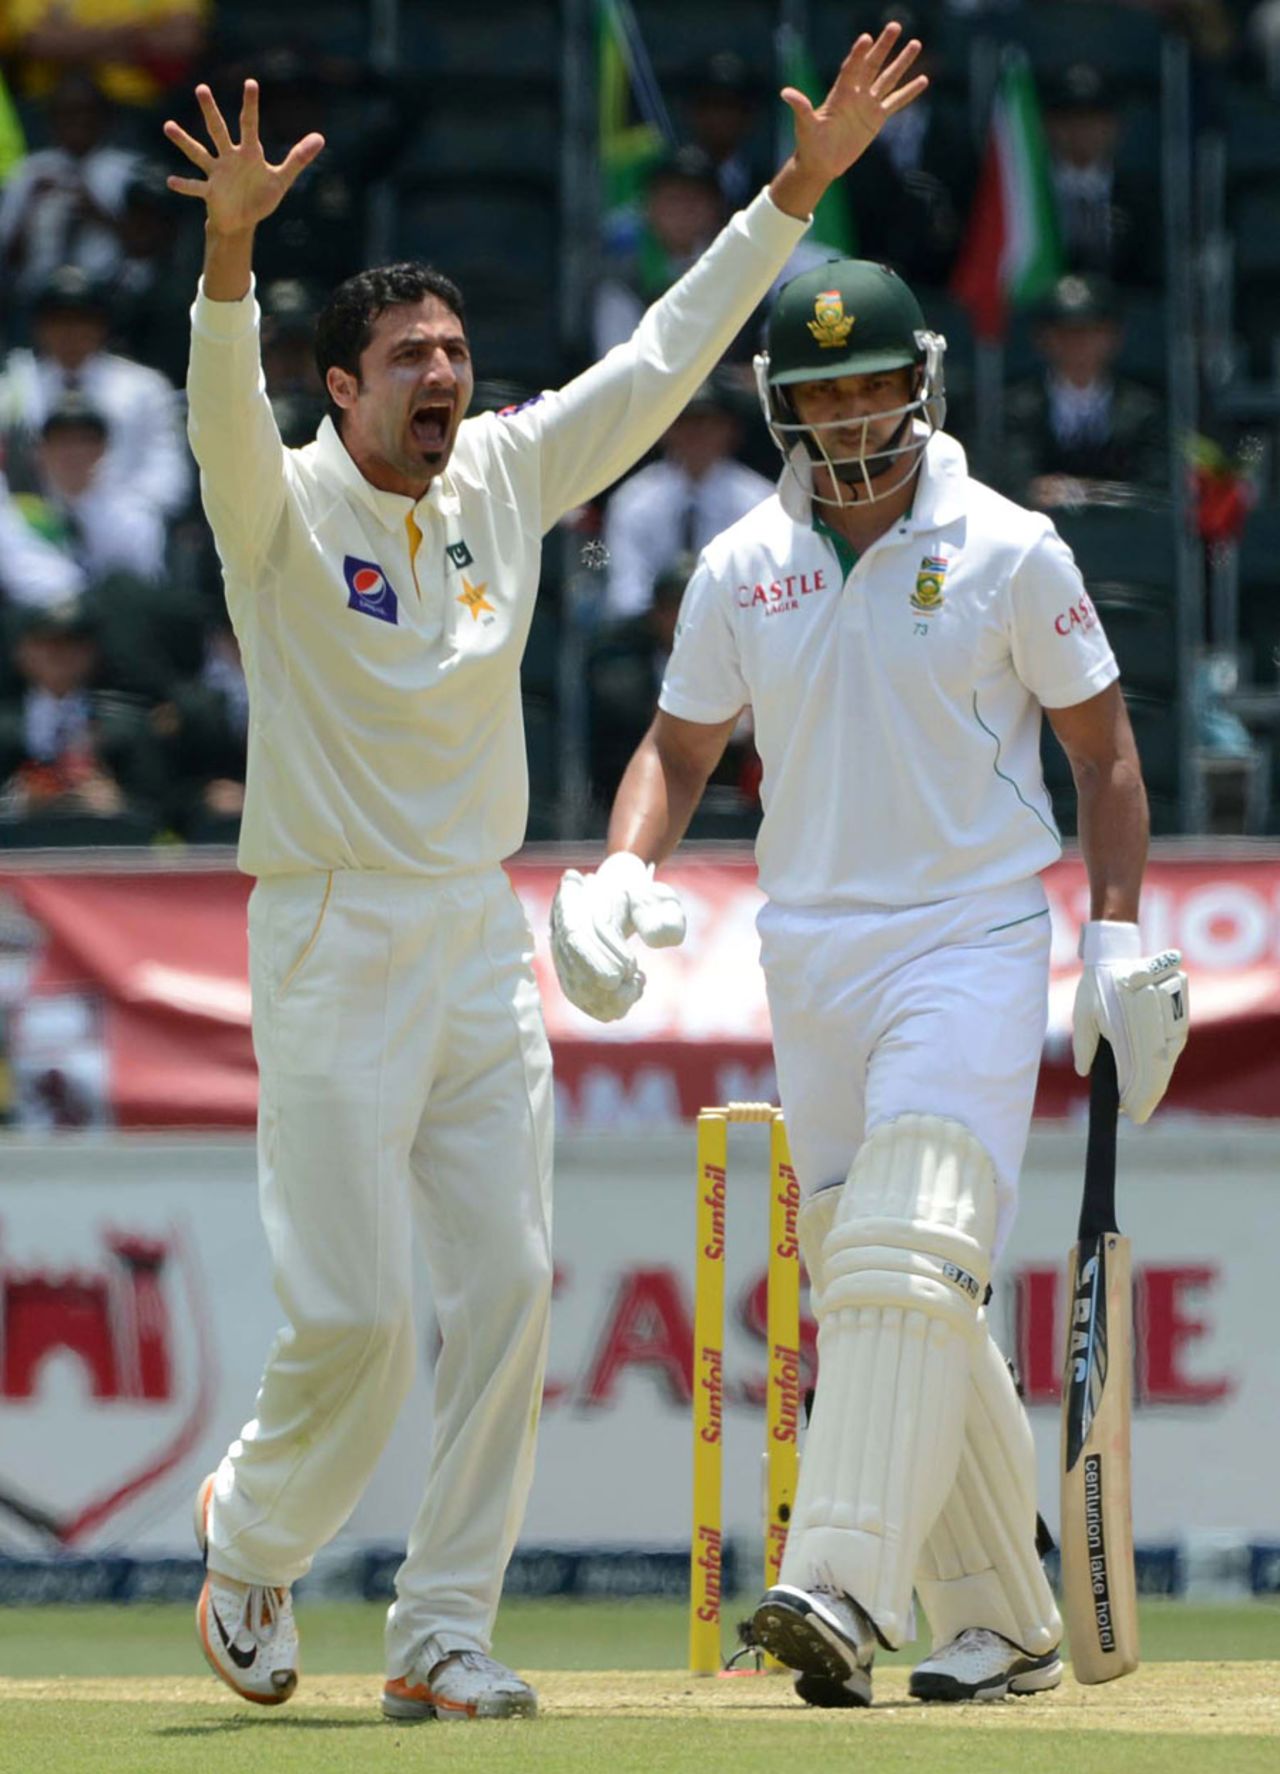 Junaid Khan bowled well in the first session, South Africa v Pakistan, 1st Test, Johannesburg, February 1, 2013